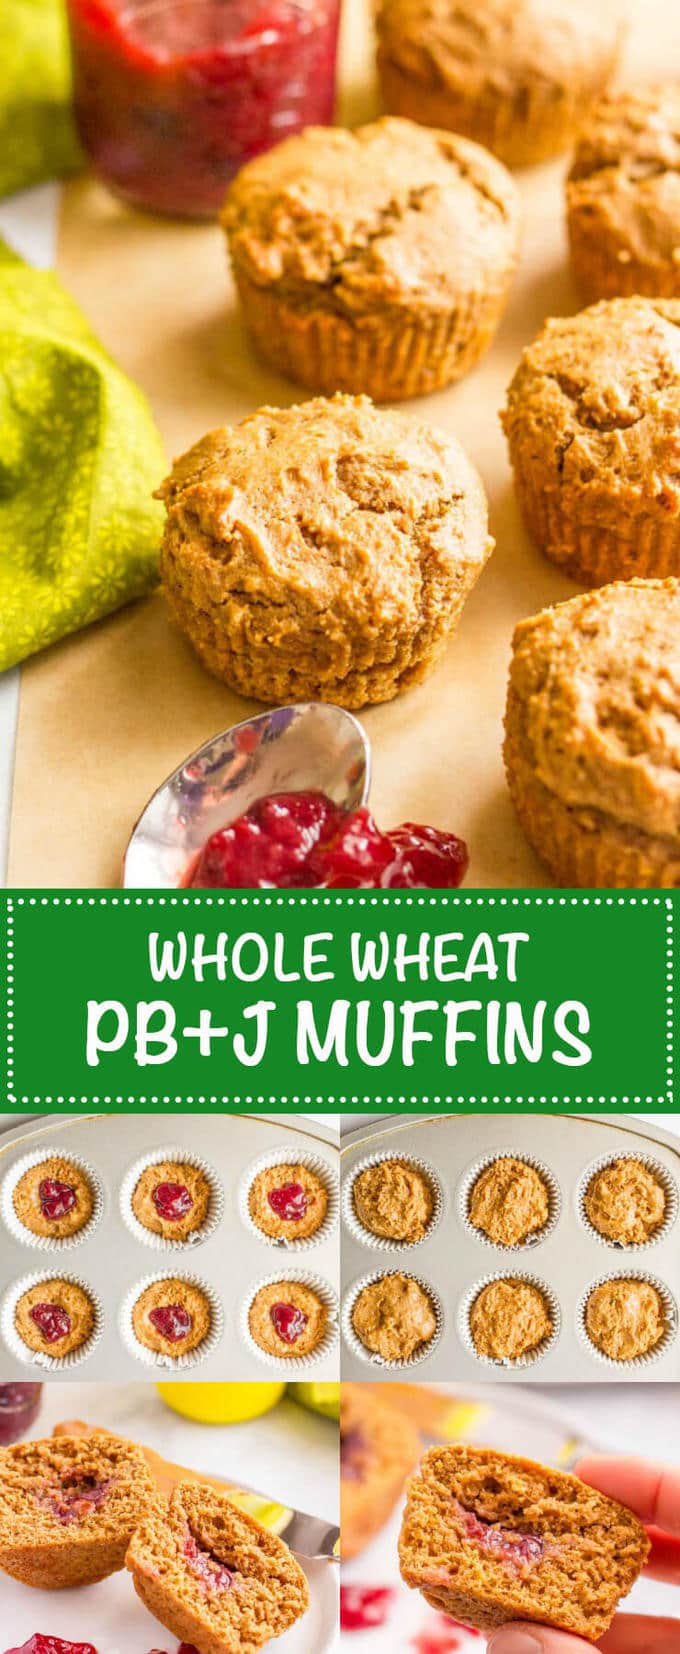 Healthy peanut butter and jelly muffins are whole wheat and naturally sweetened, with no butter or oil but plenty of peanut butter flavor and a fun jelly center! A fun kids breakfast, snack or school lunch addition!